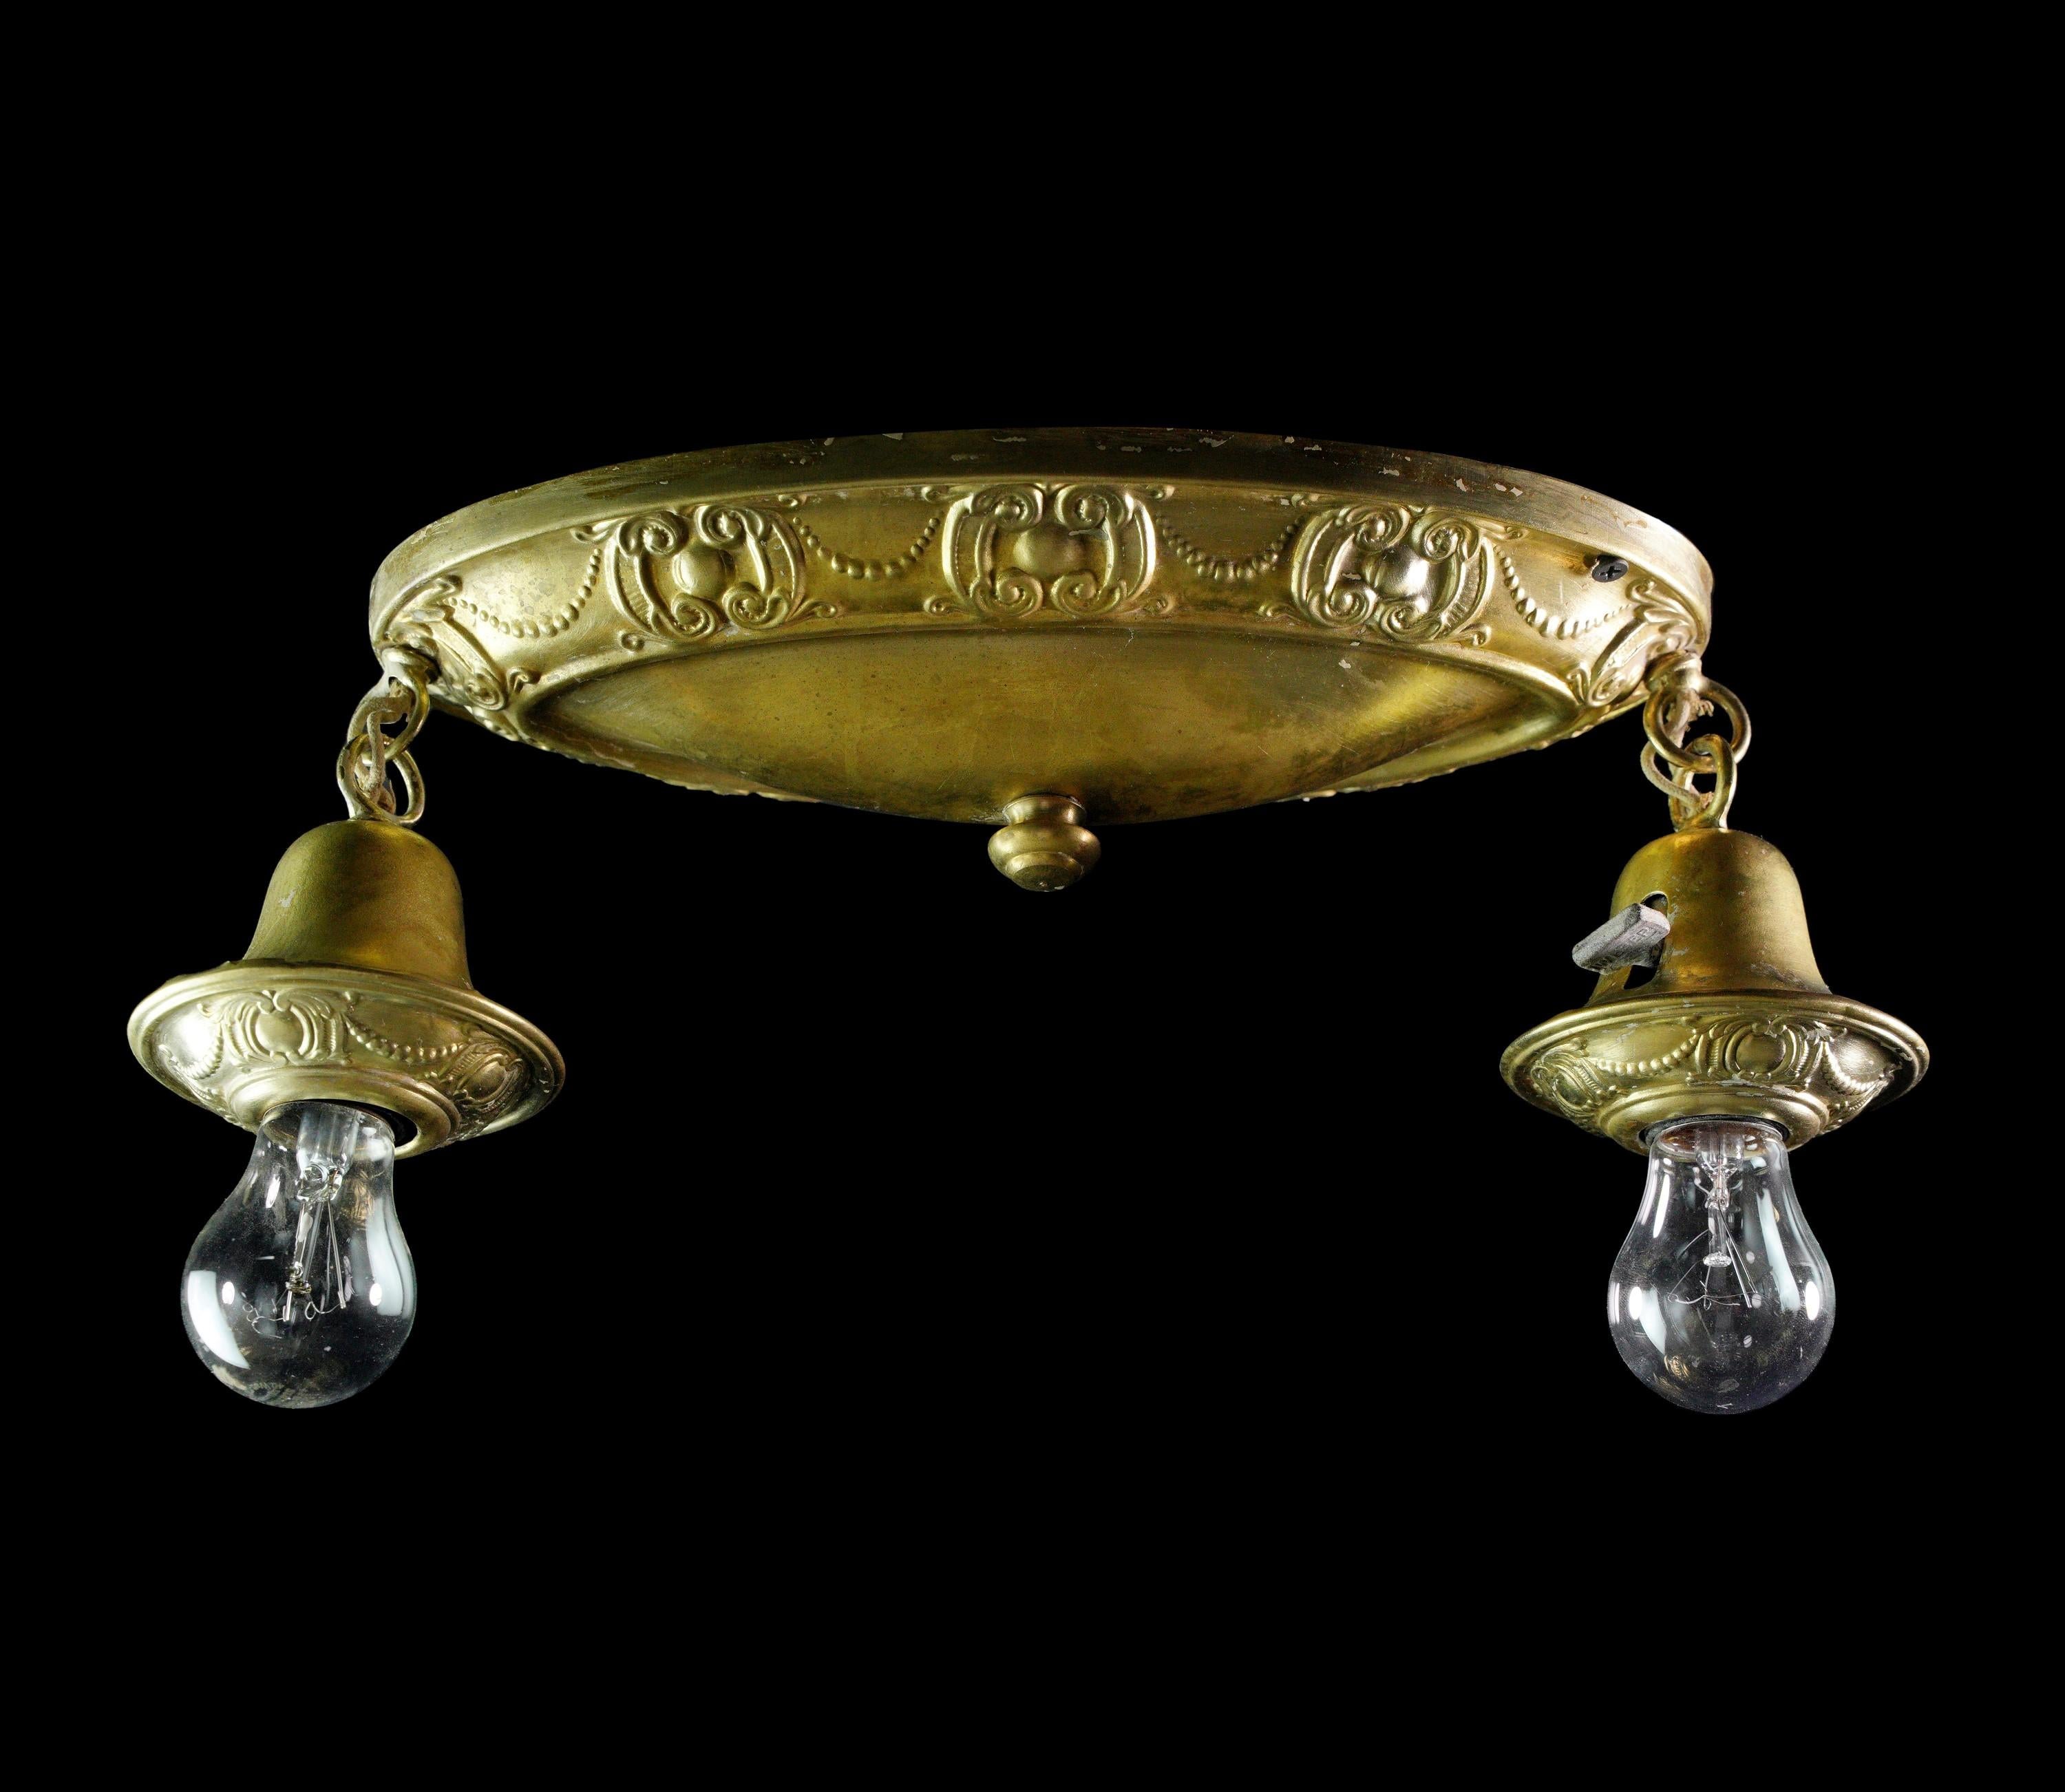 Enhance your space with the elegance of our antique early 1900s brass two light flush mount fixture with two exposed bulbs. The light features an oval canopy with Victorian detailing in the form of scrolling and beading and two downward facing